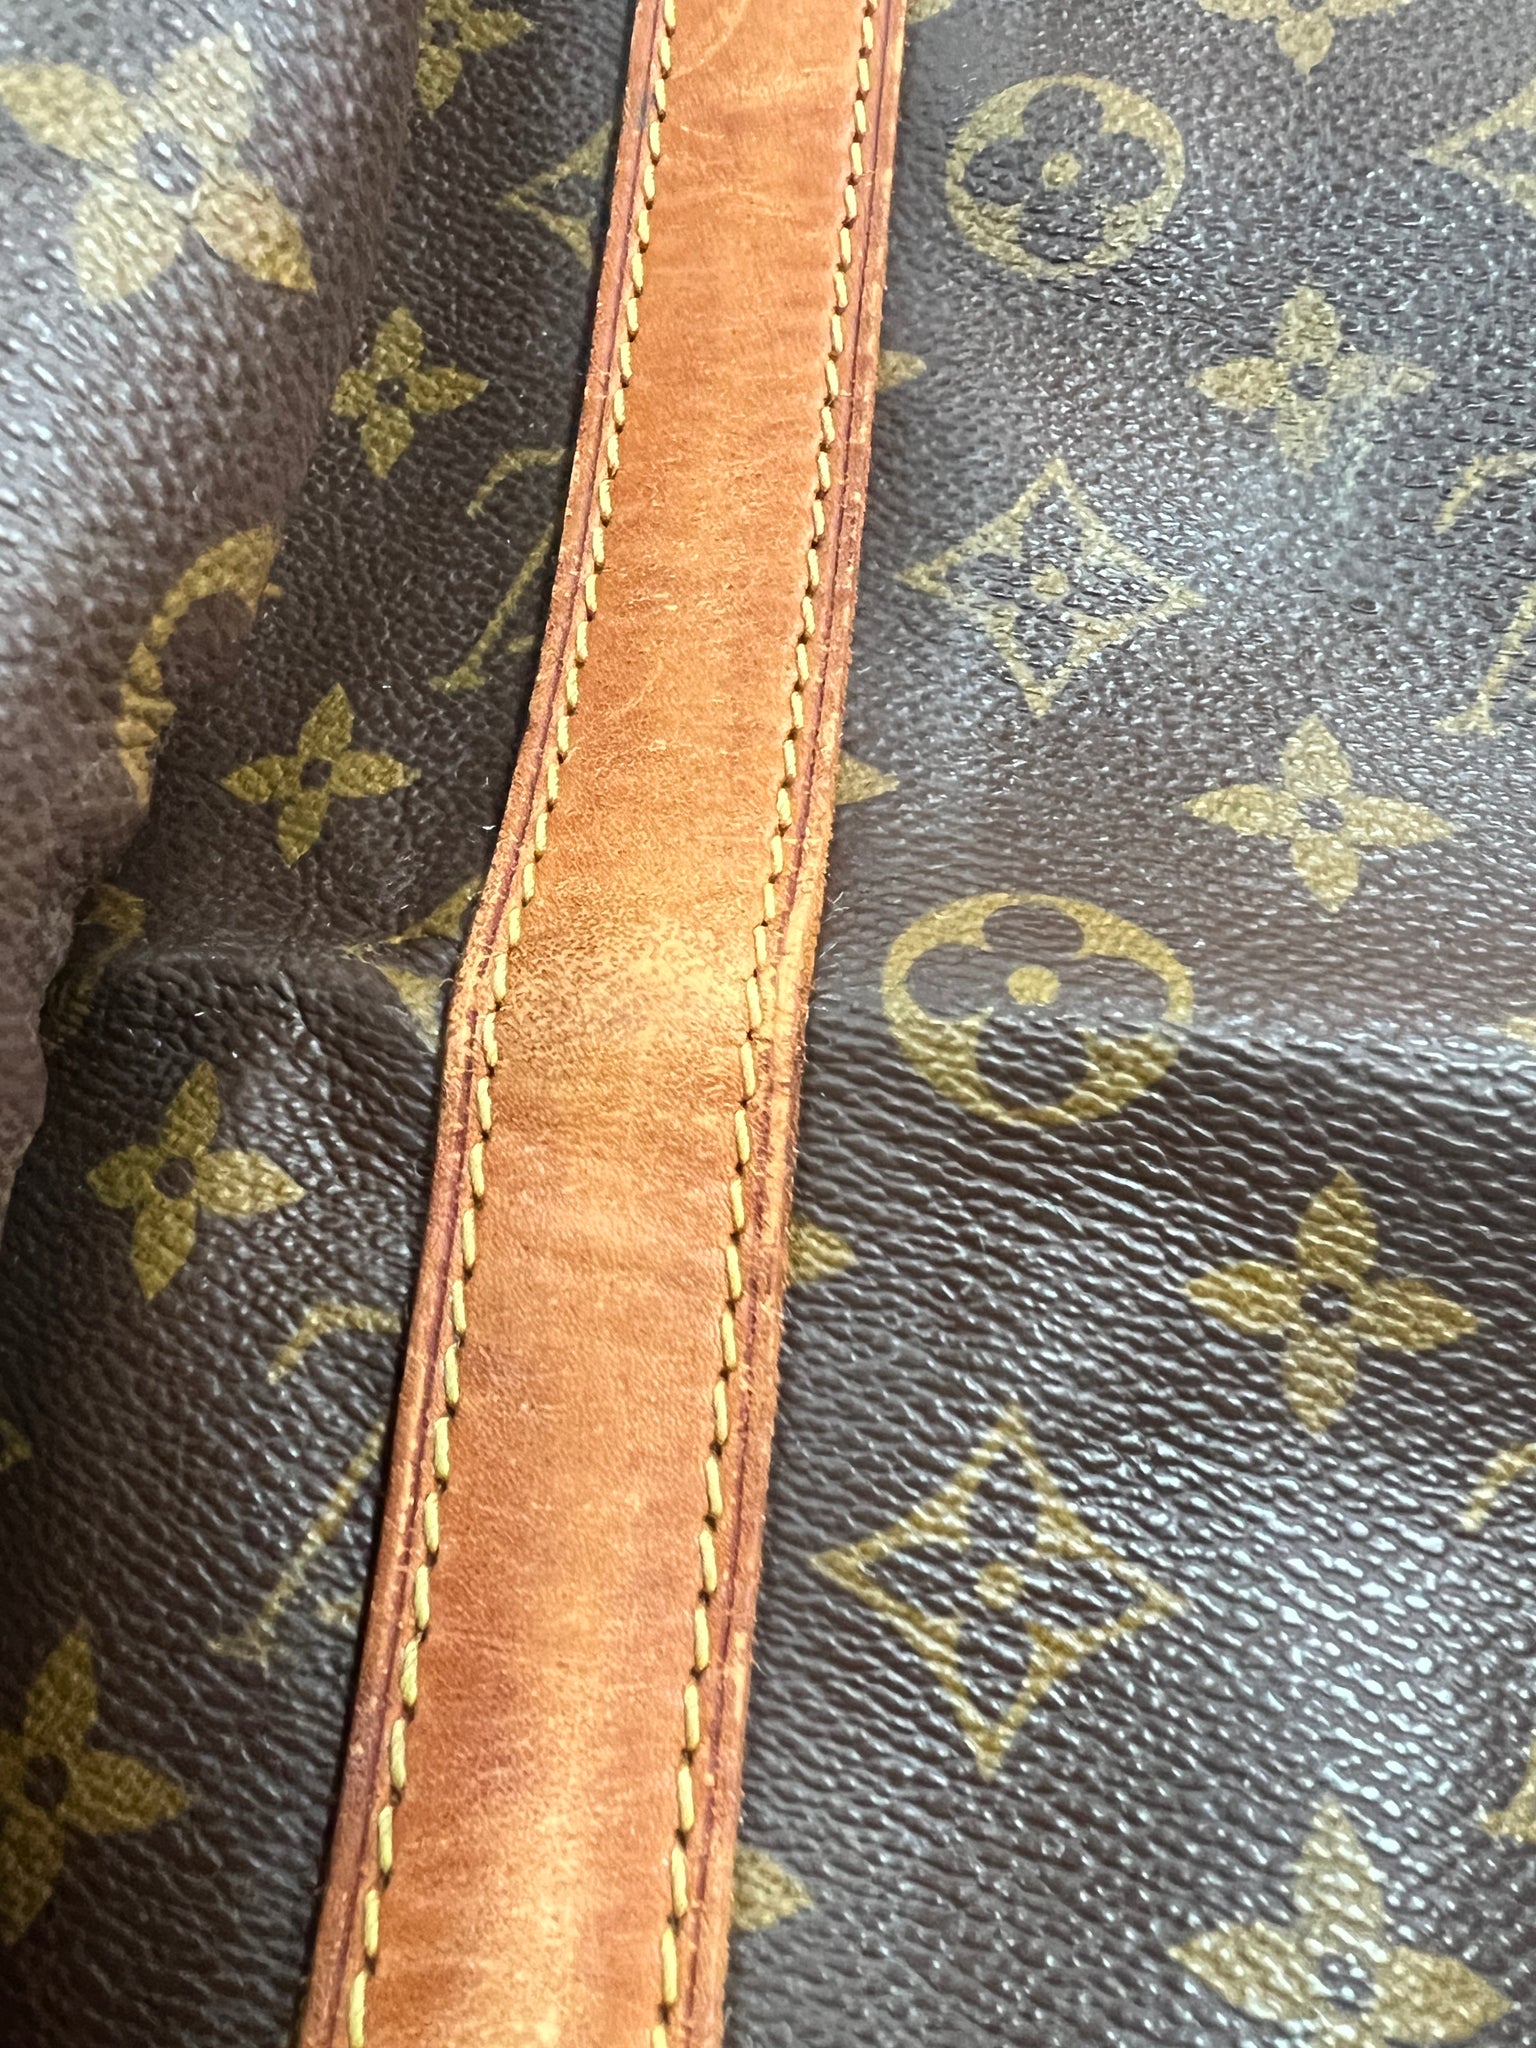 Eclair zippers were used by the French Luggage Company, correct? So if this  were authentic, it would say made in USA? : r/Louisvuitton